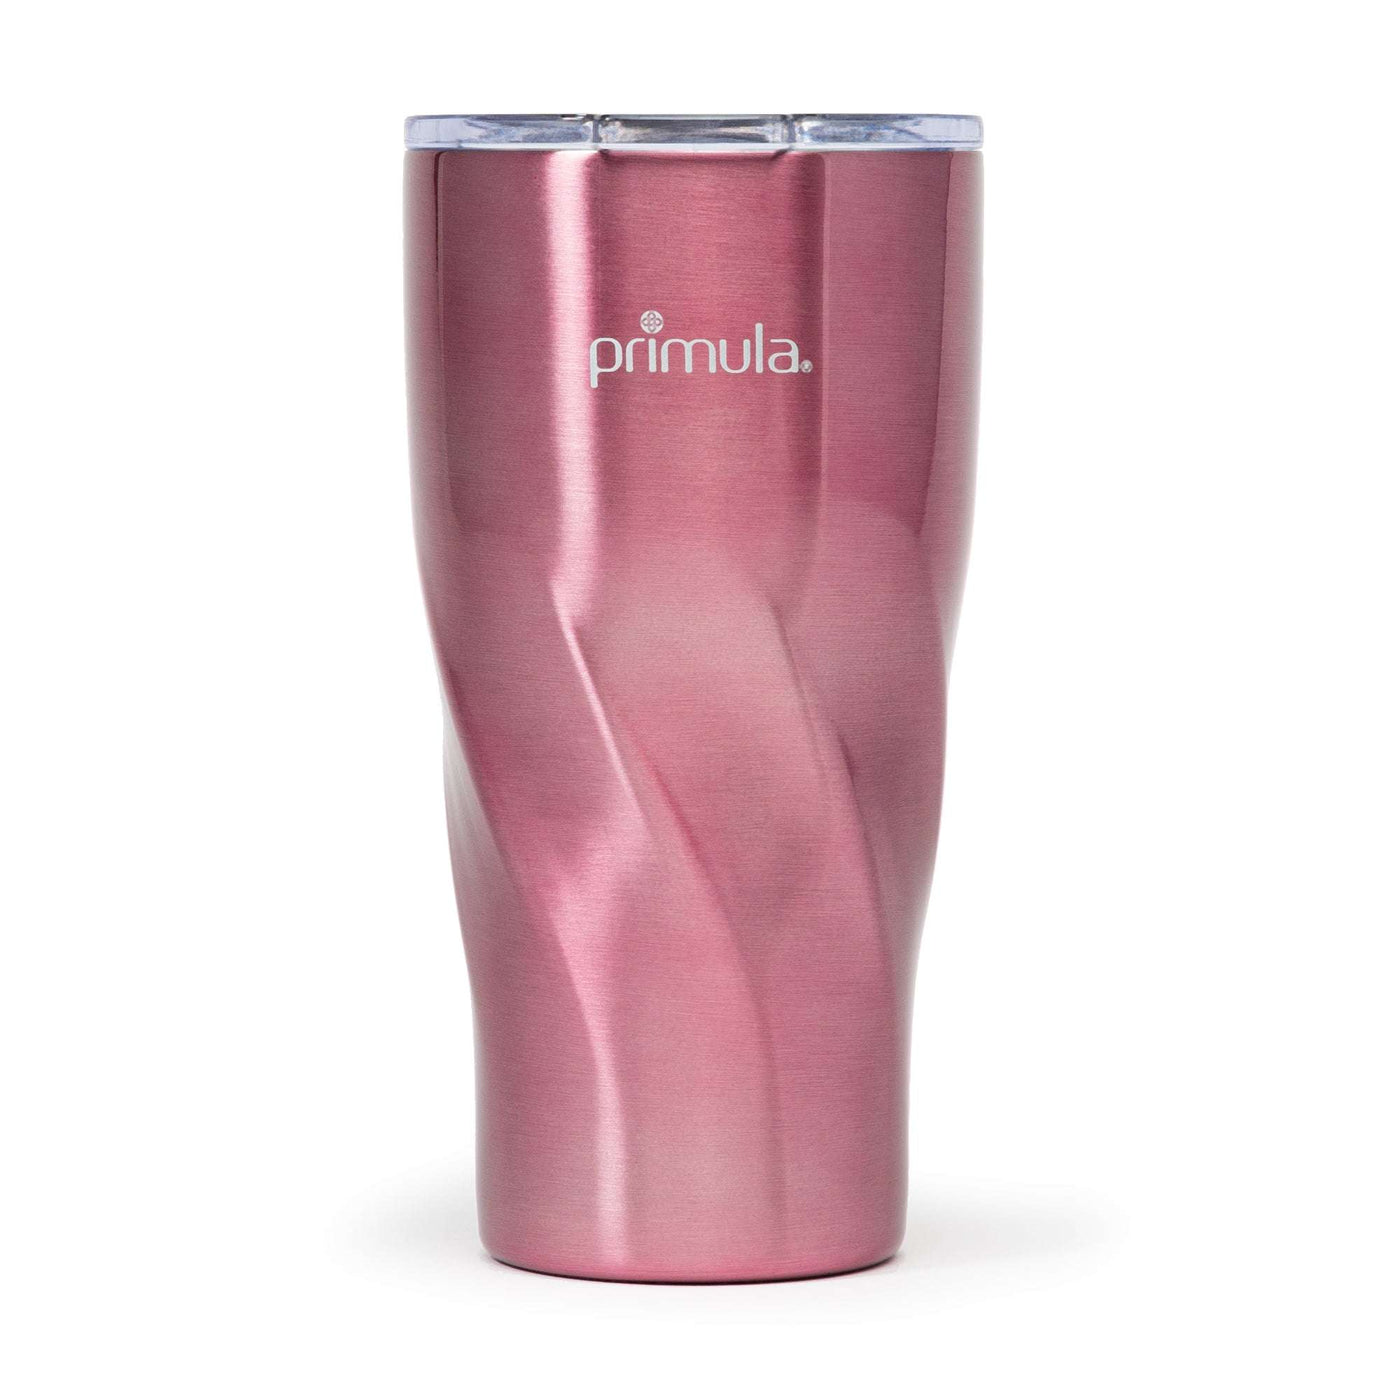 Primula Avalanche Stainless Steel Insulated Tumbler, 20-32oz